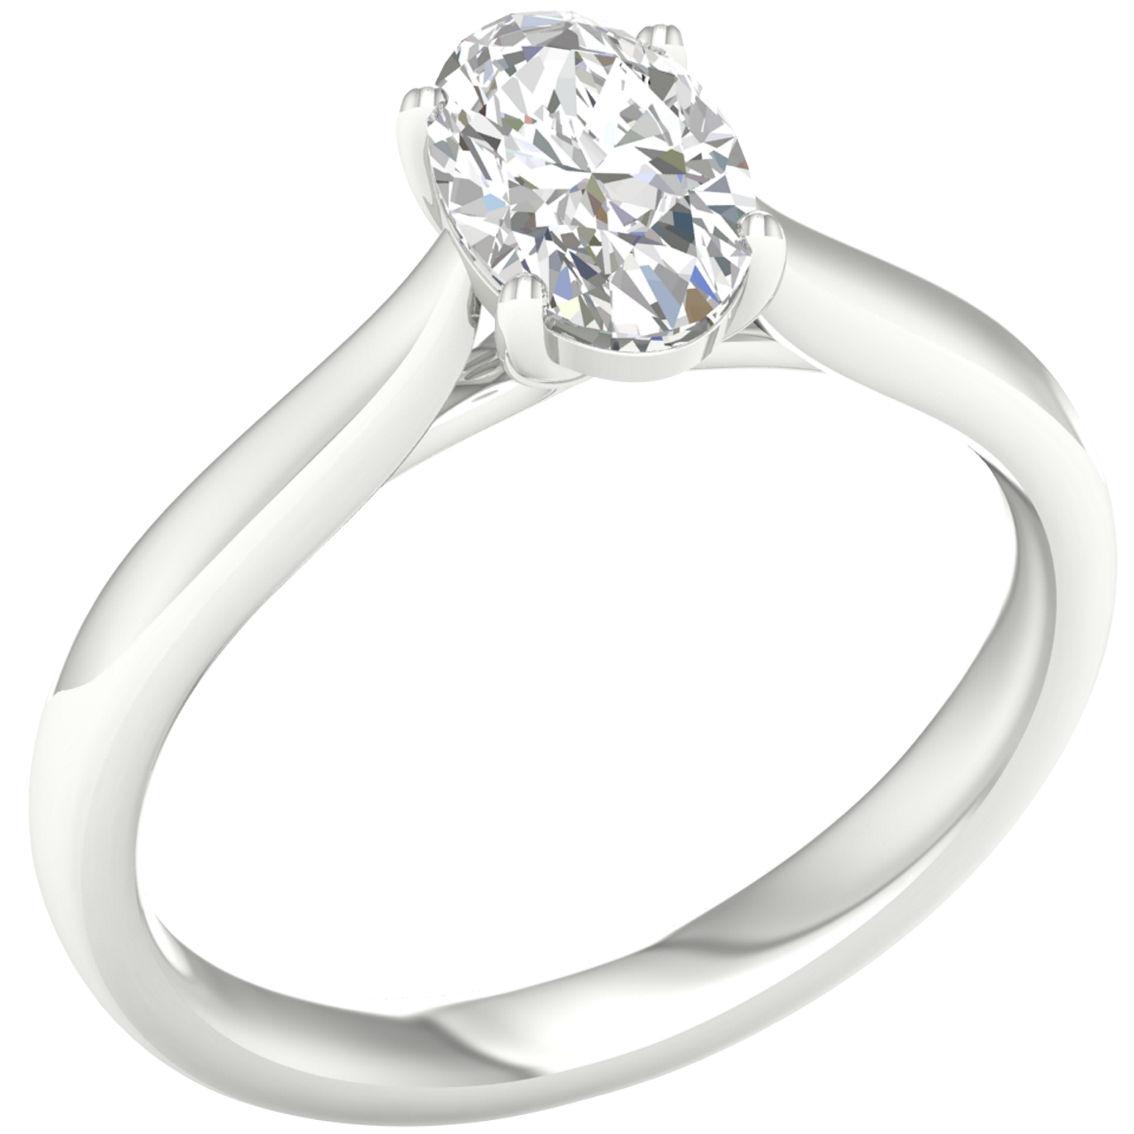 Pure Brilliance 14K White Gold 1 ct. Oval Solitaire Ring IGI Certified, Size 7 - Image 2 of 2